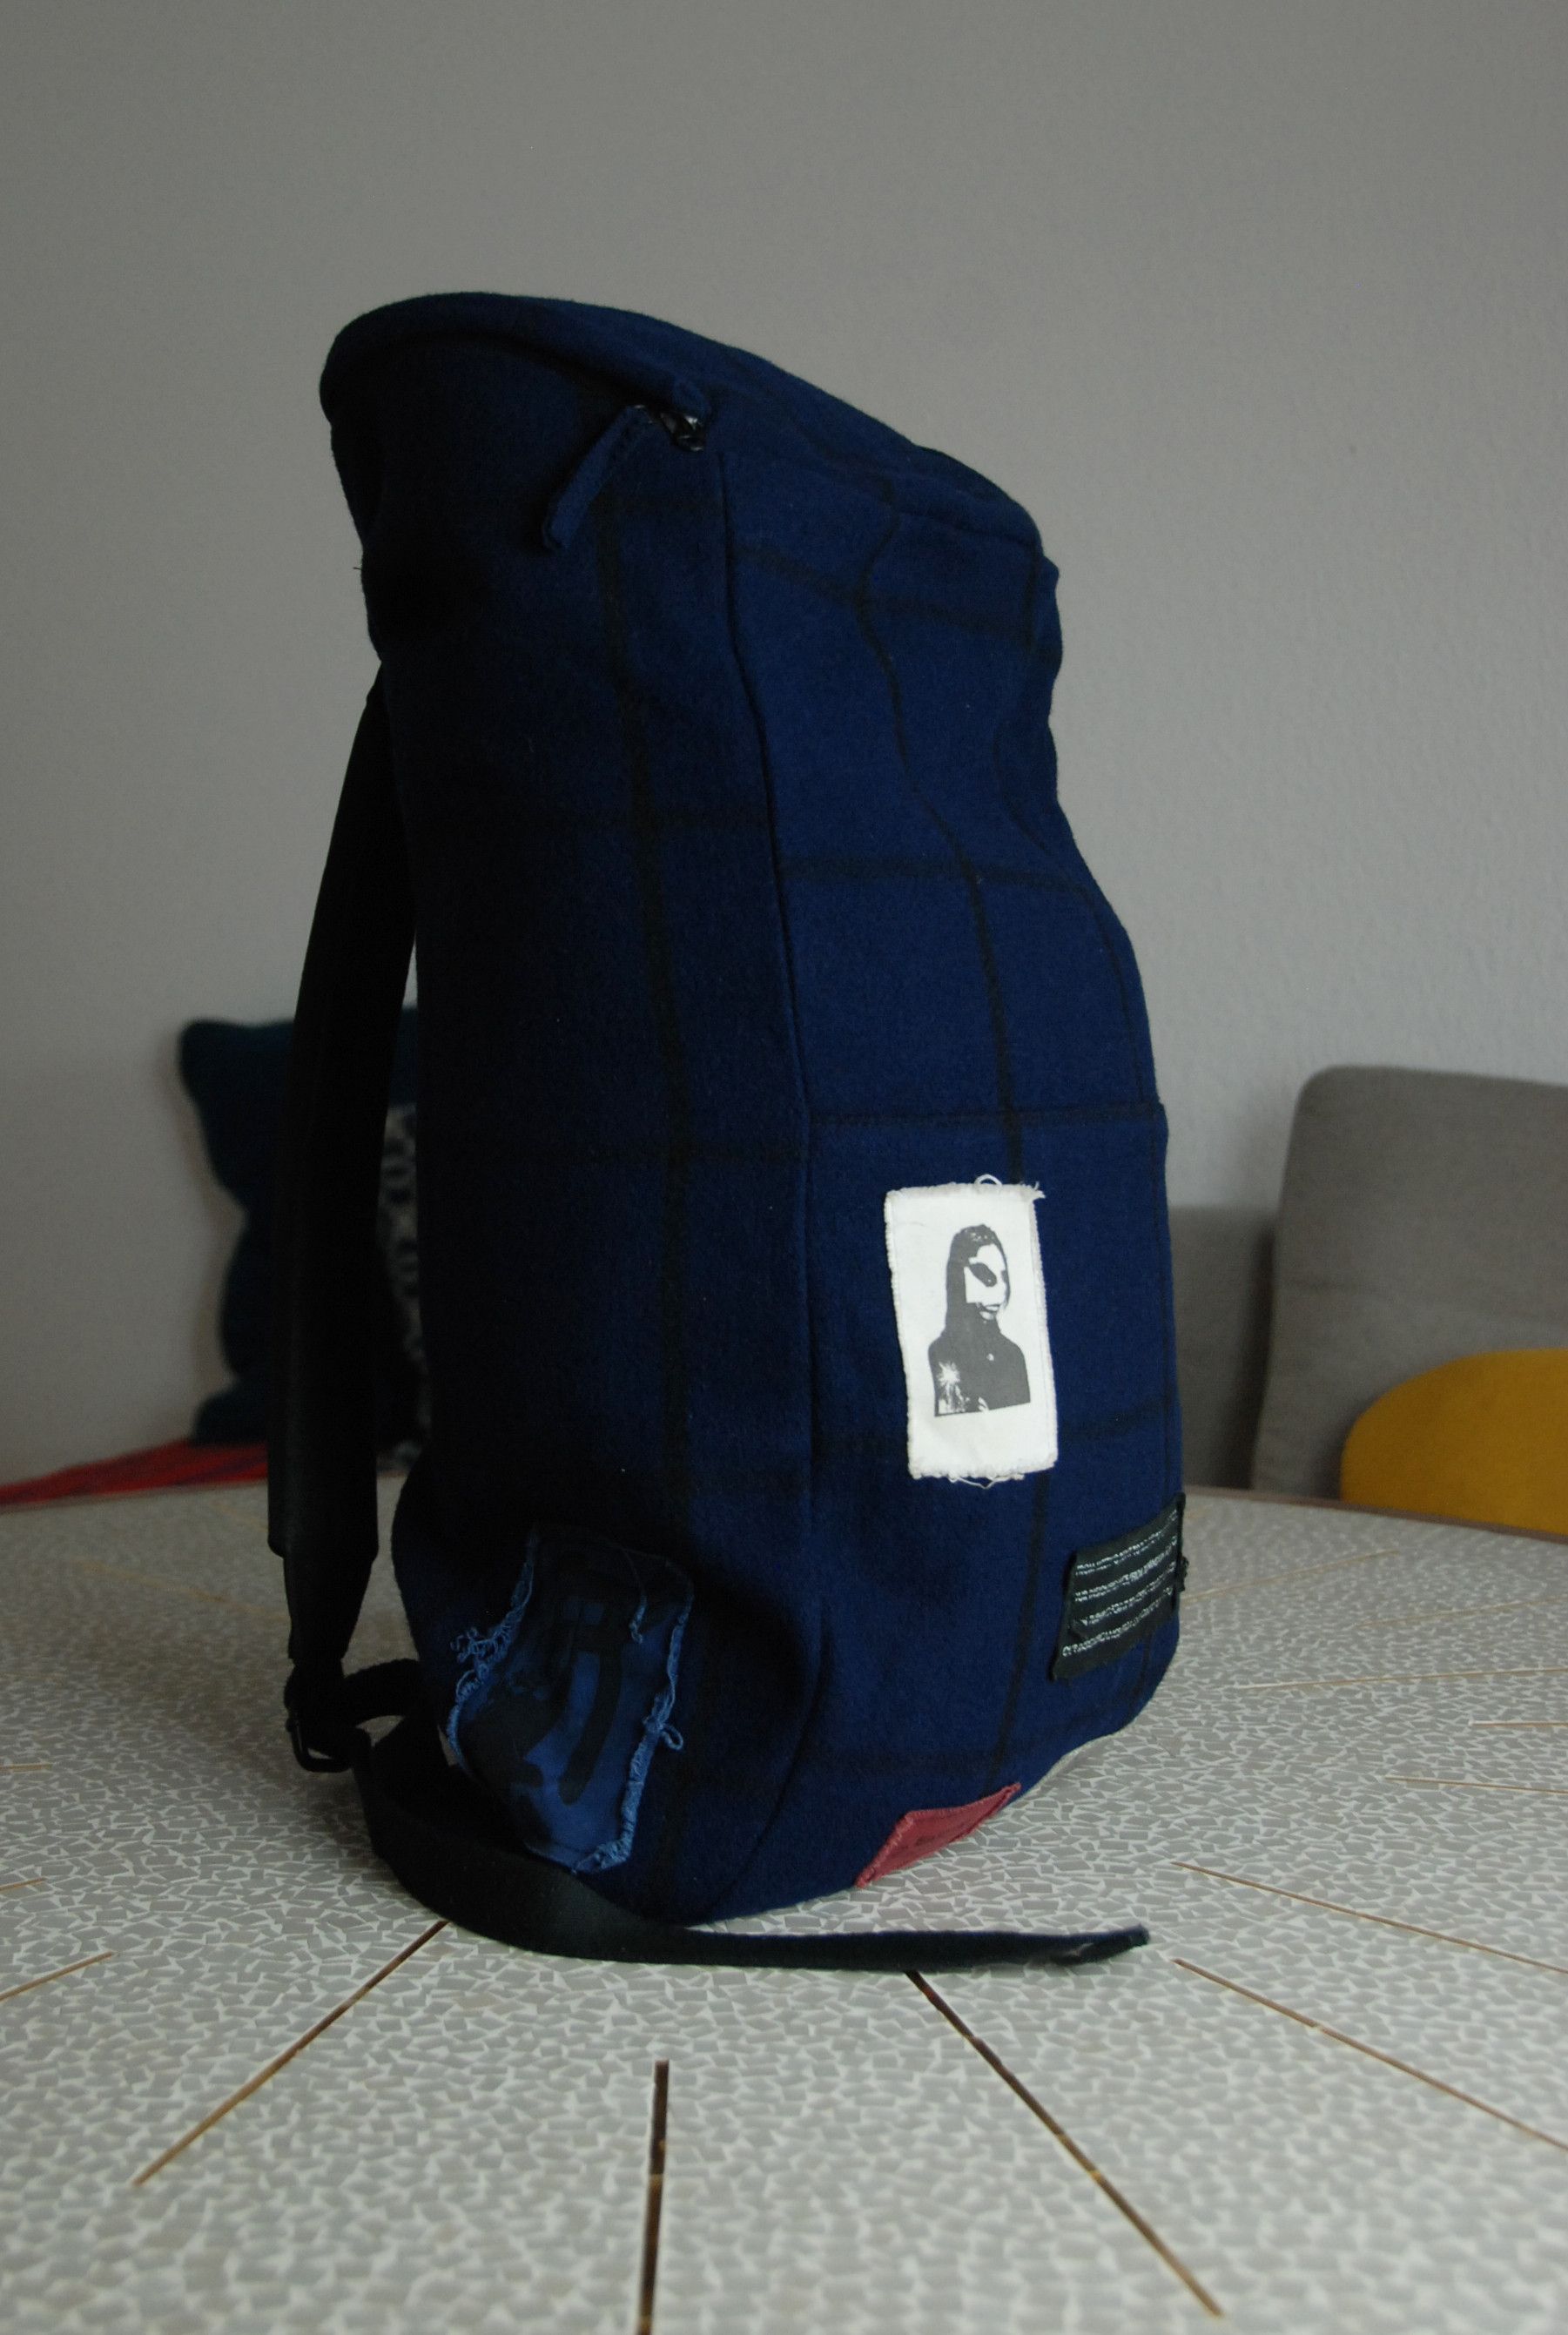 Raf Simons Wool Patch backpack from F/W 2008, Grailed